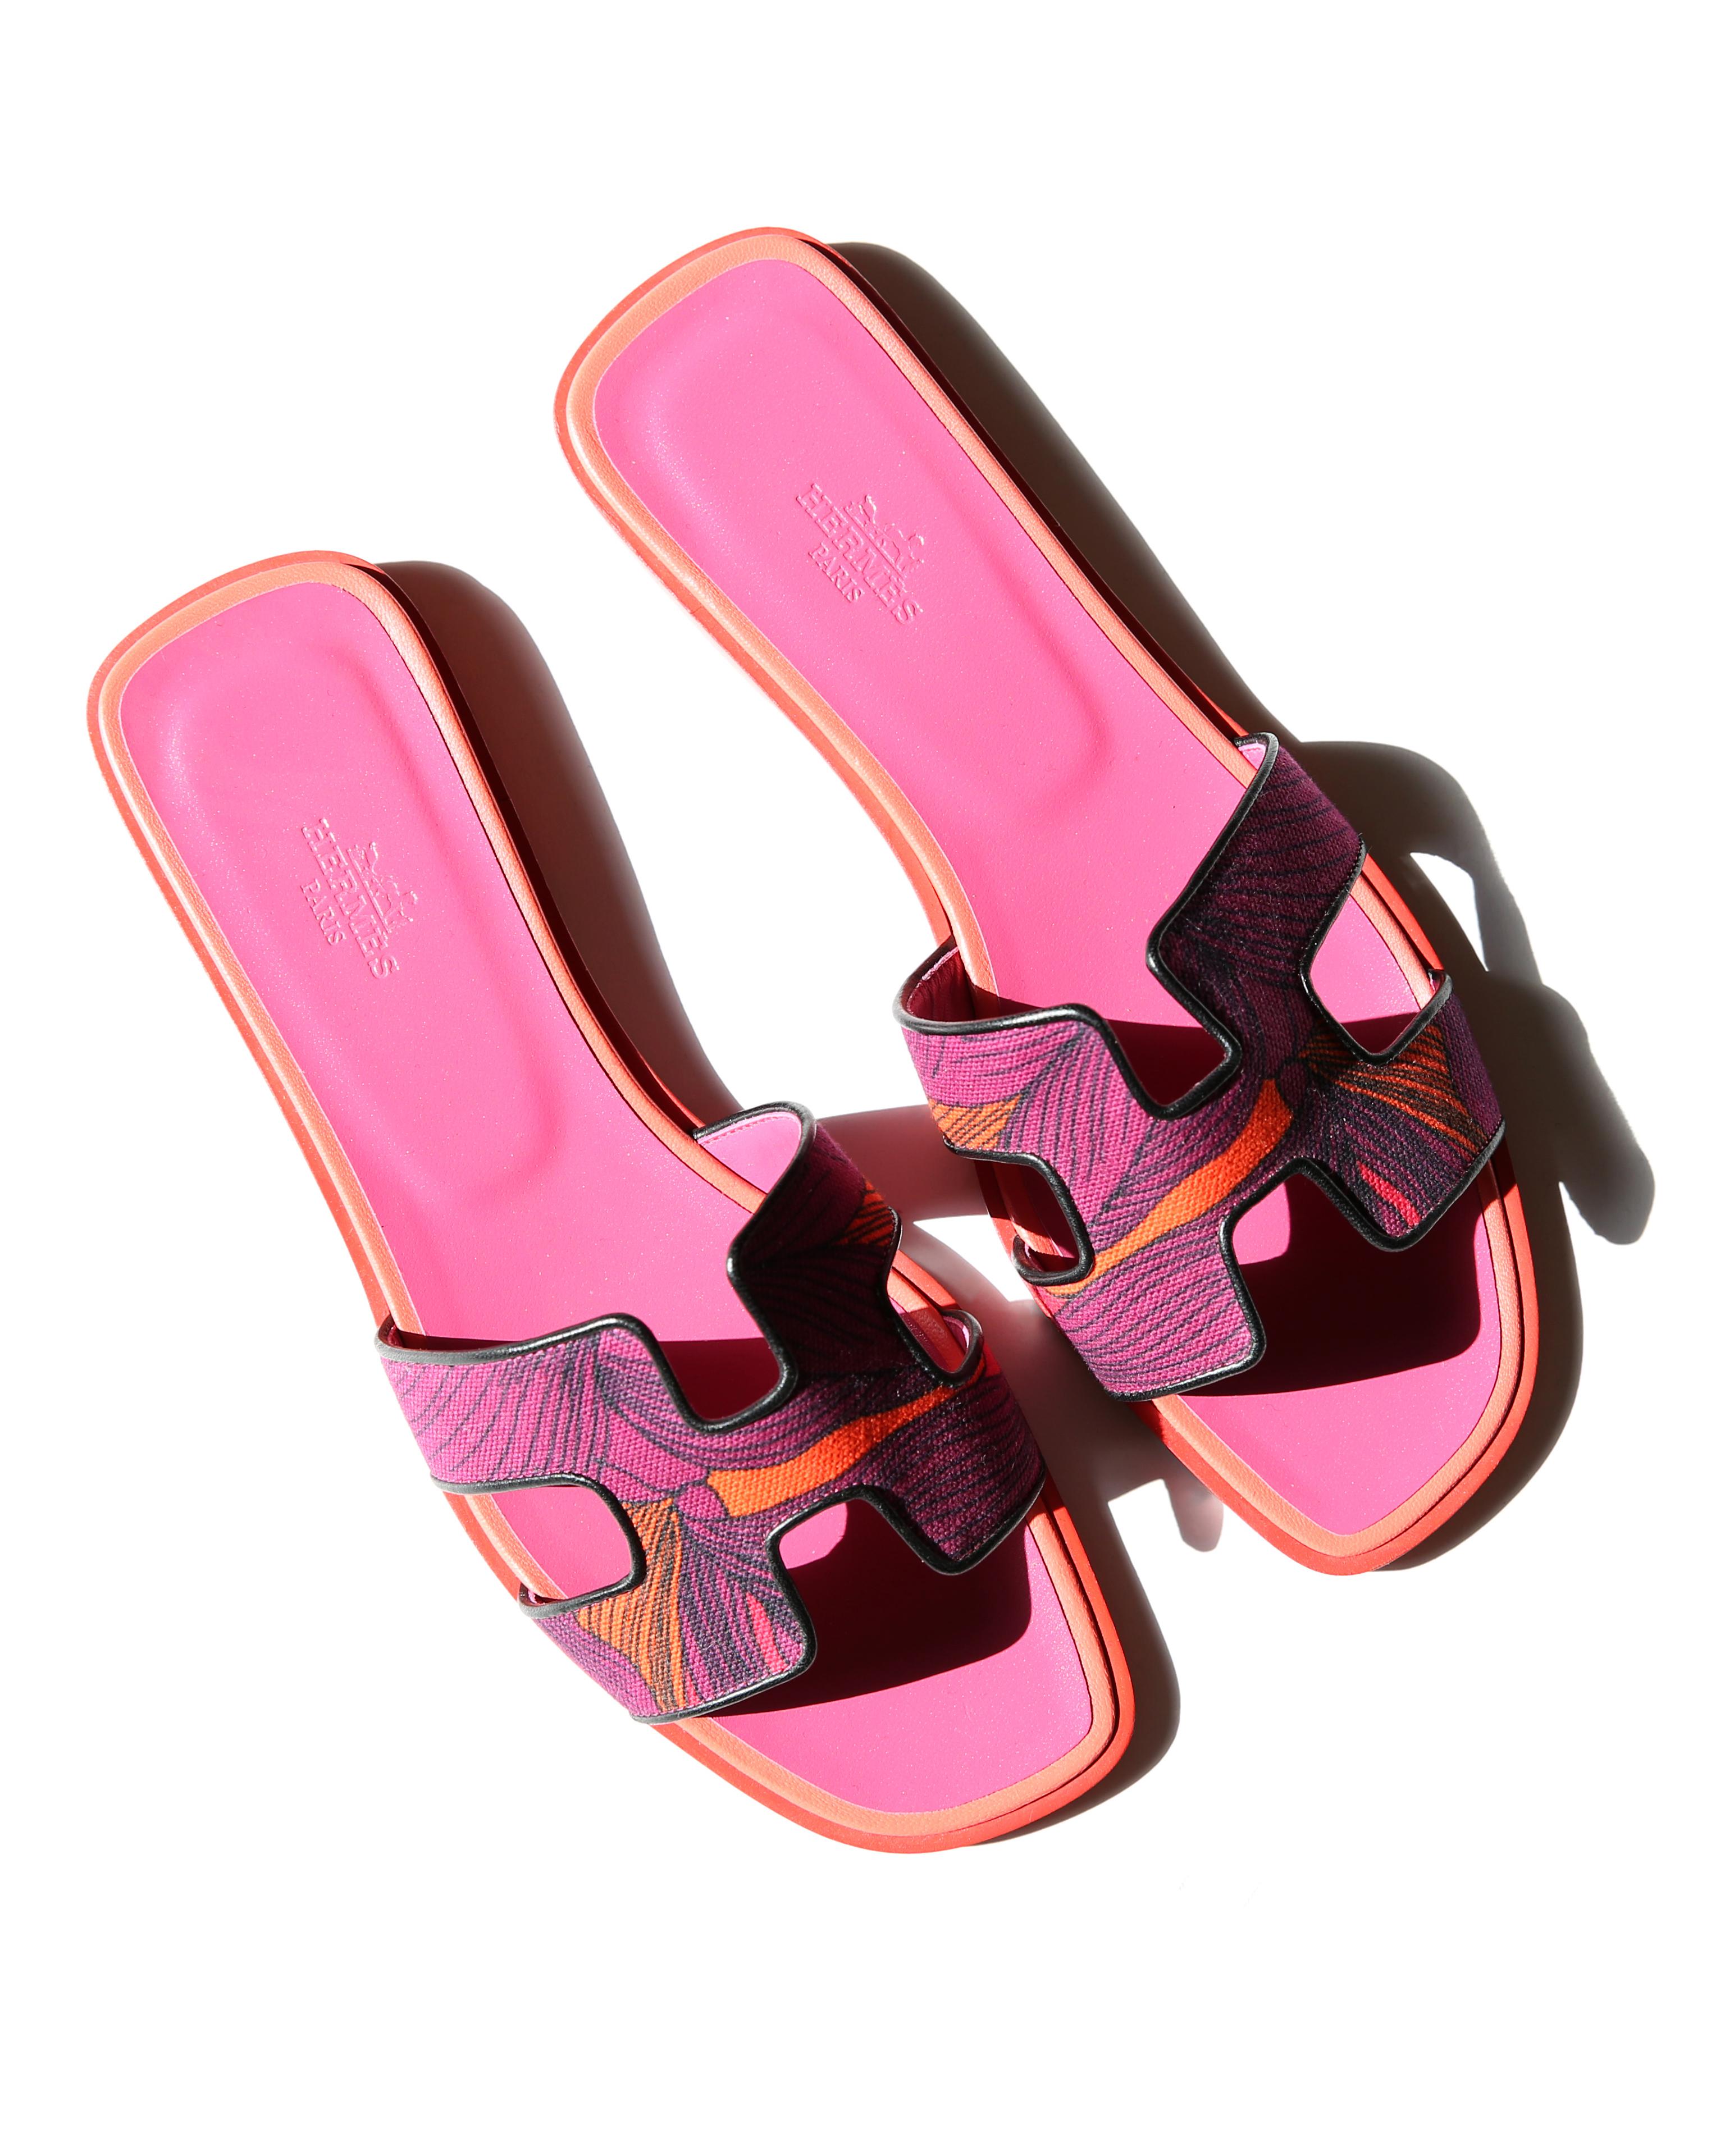 Hermes limited edition sandals in 'Iris' cotton printed canvas, leather sole and fuchsia lining
Purple orange and black canvas print with black leather piping

FREE SHIPPING WORLDWIDE!!!

Size:
EU 39
US 9
UK 6

Brand new without box and showing some